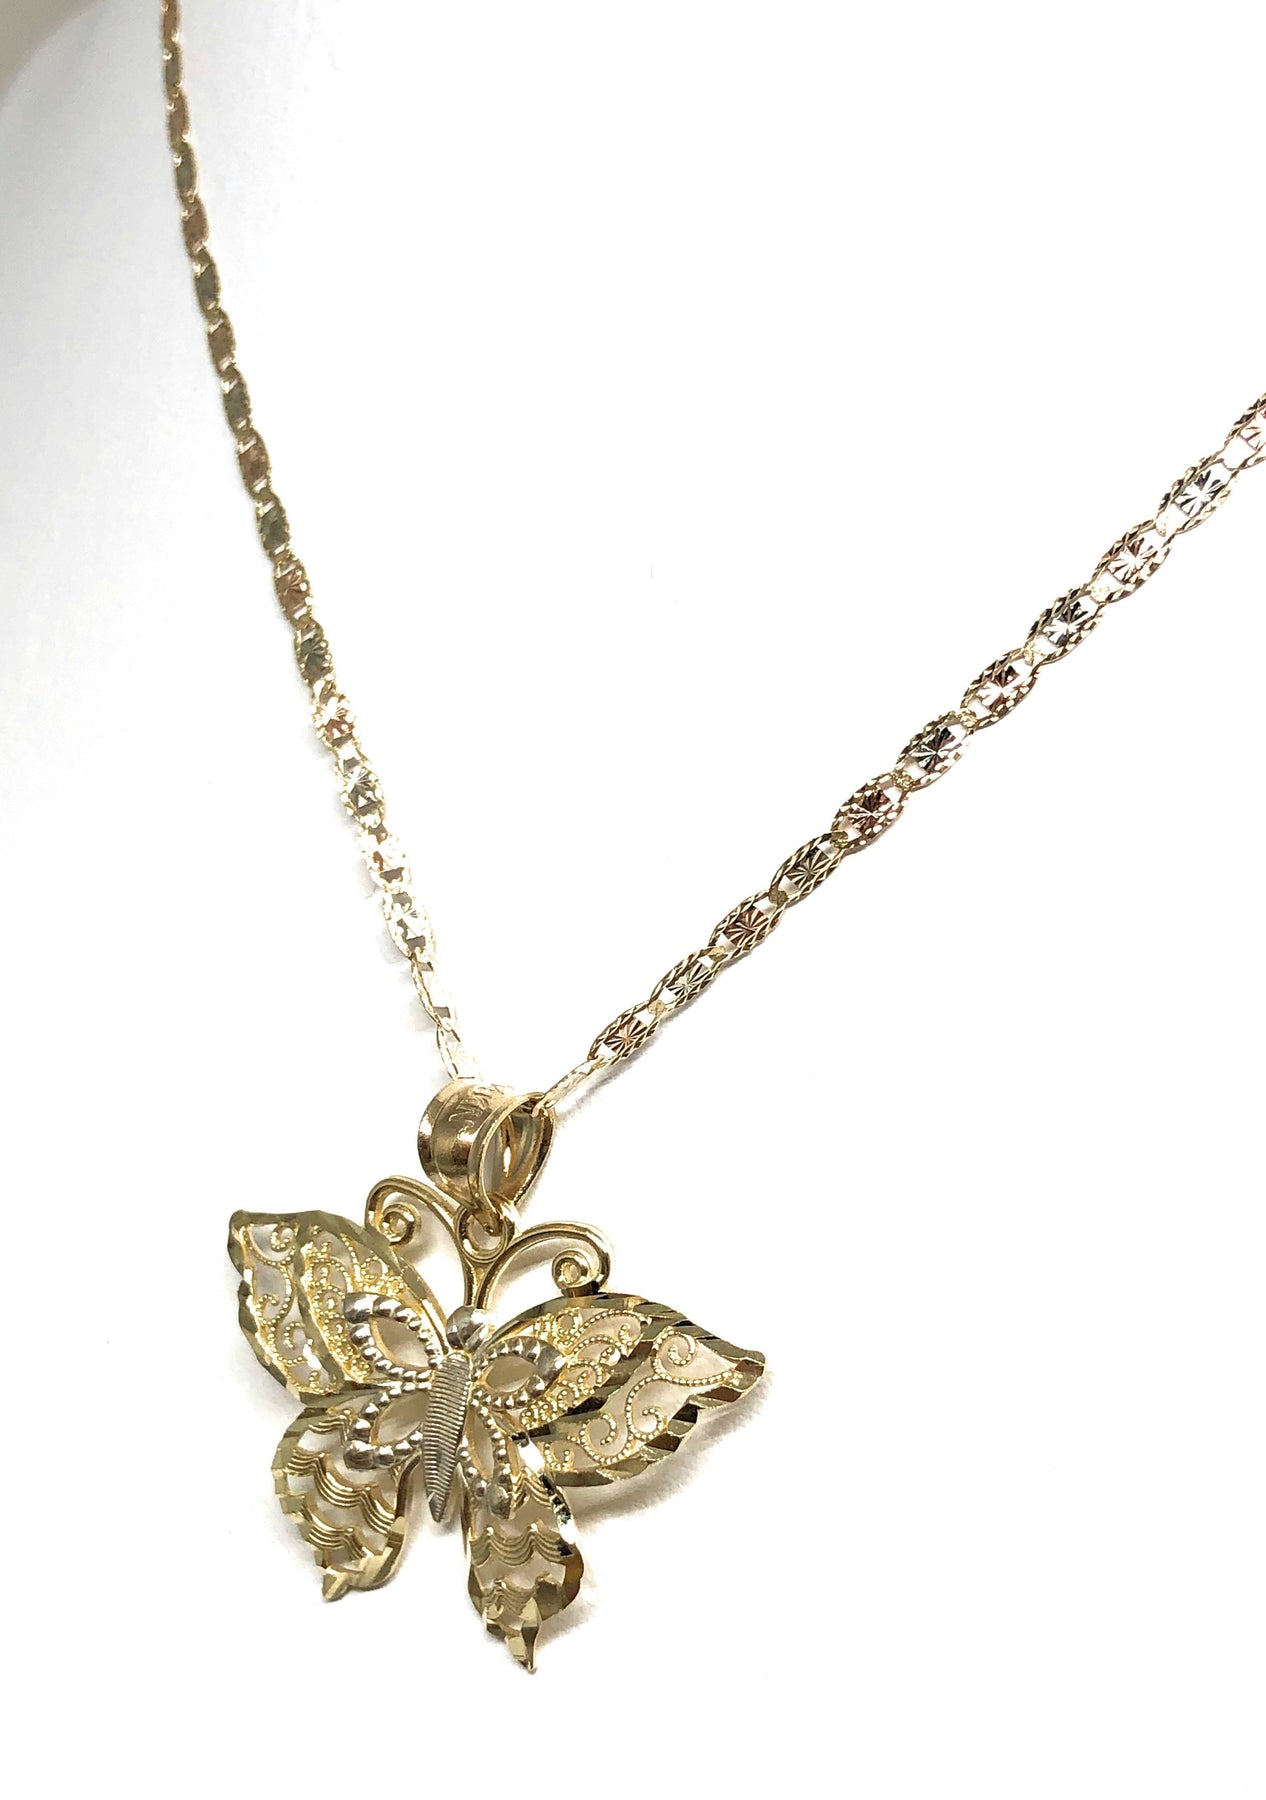 10k Solid Gold Butterfly Pendant Necklace Valentina Chain – Fran